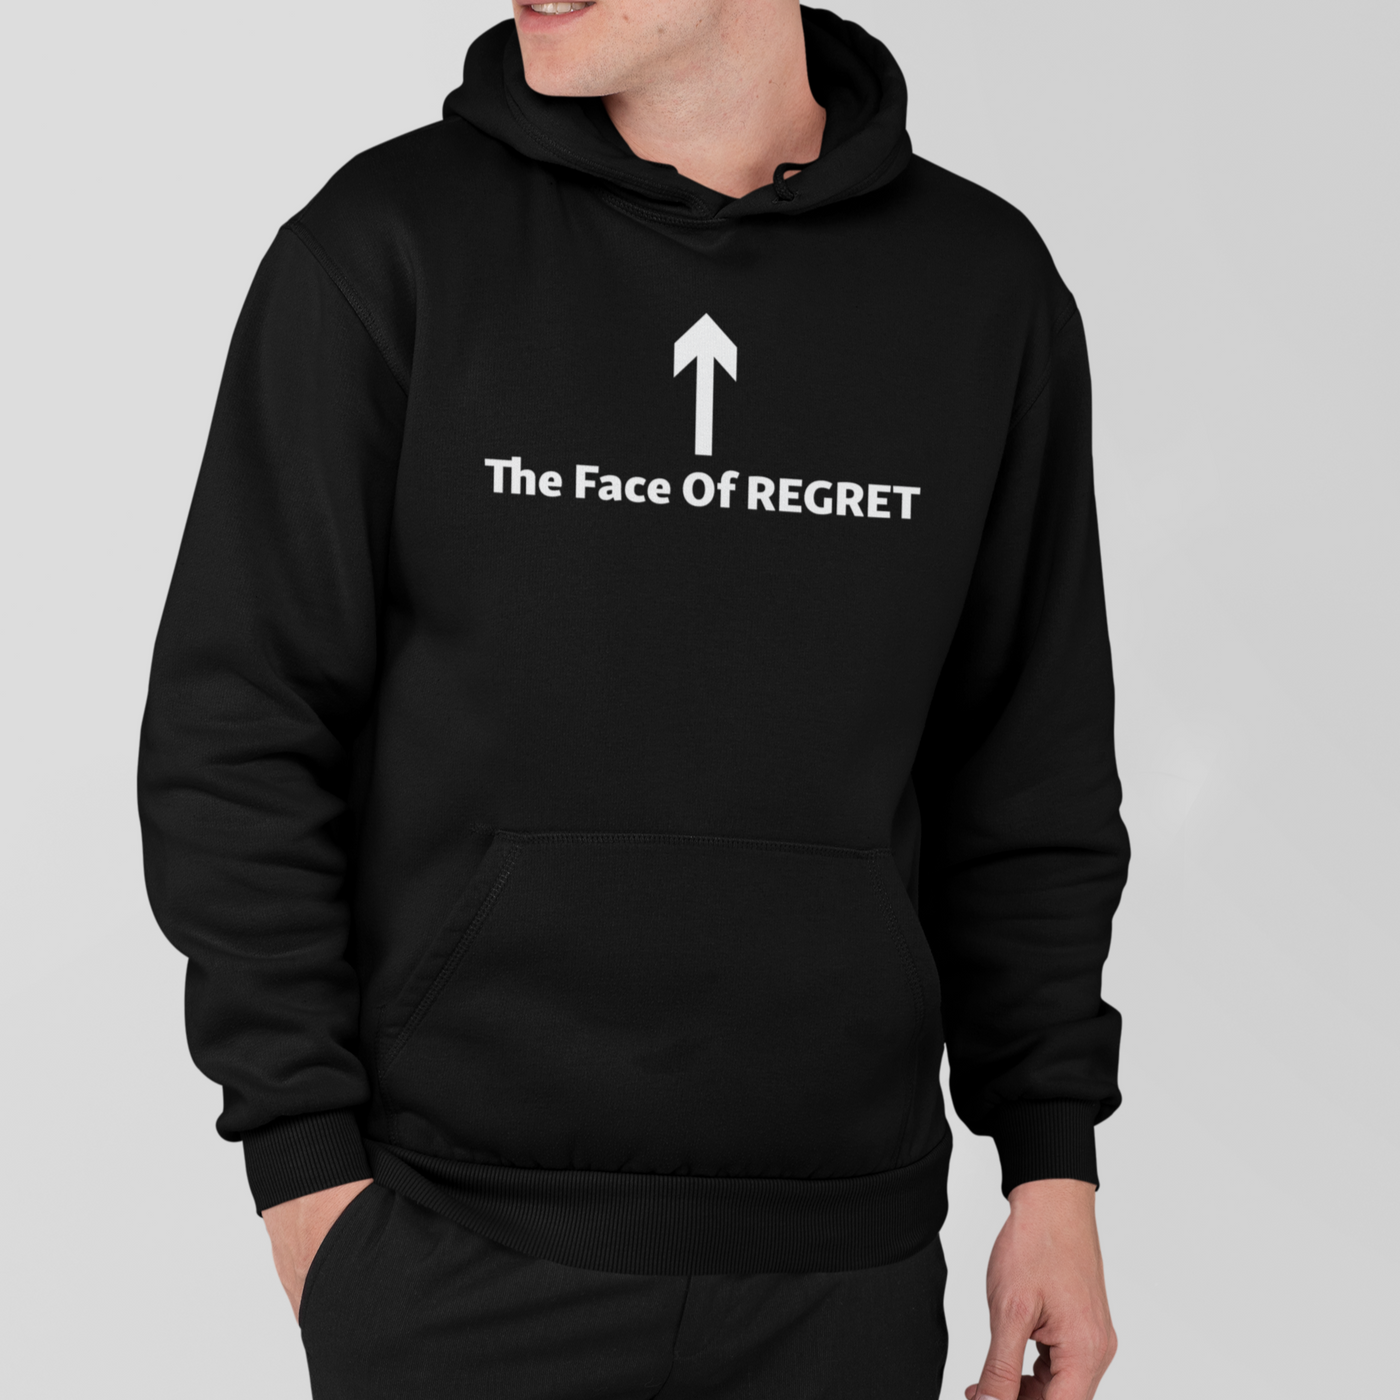 The Face Of Regret - Unisex Pullover Hoodie